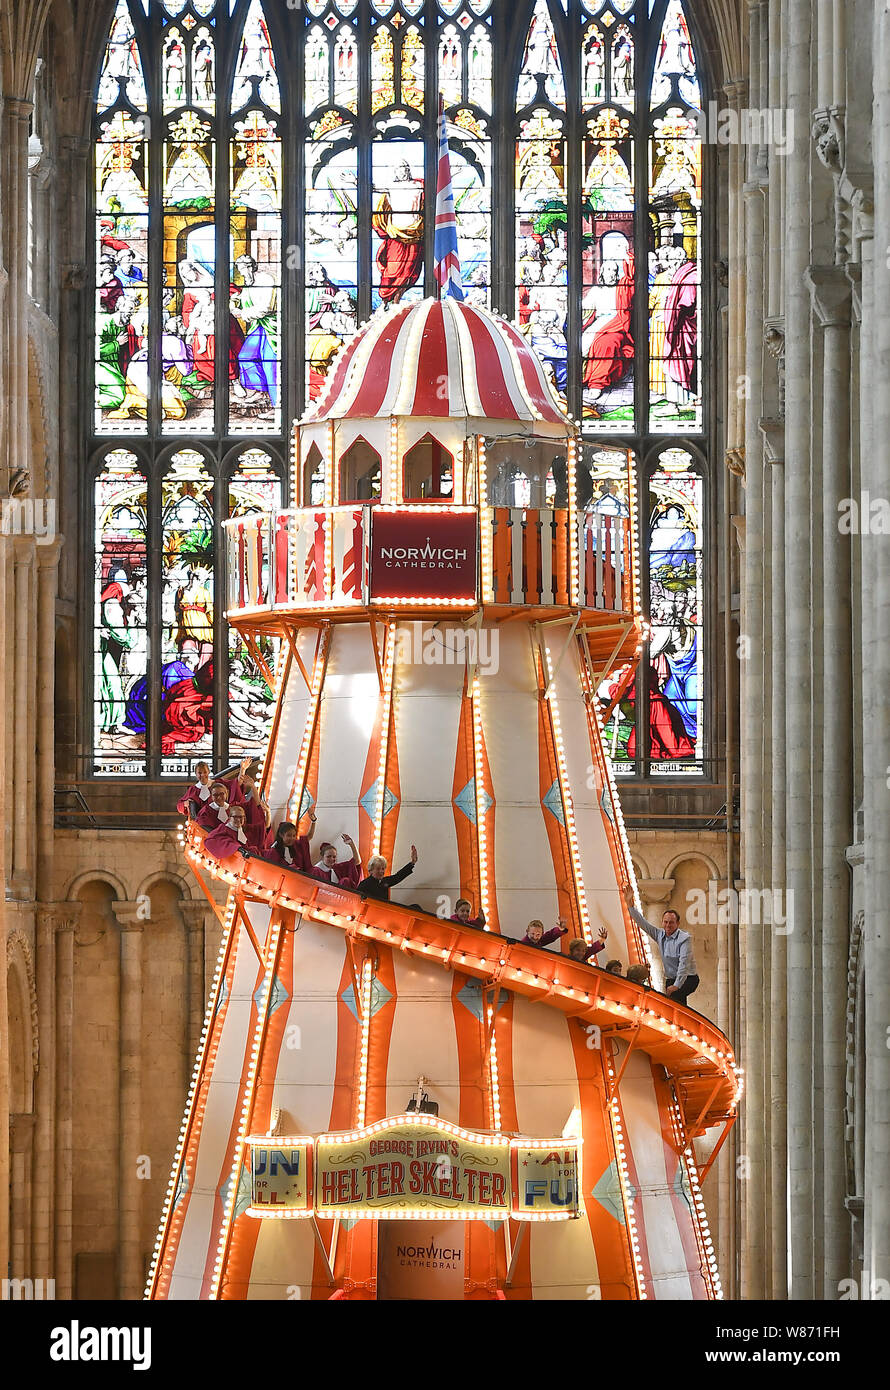 Choristers from Norwich Cathedral choir goes down a 40ft helter skelter installed inside Norwich Cathedral as part of the Seeing It Differently project which aims to give people the chance to experience the Cathedral in an entirely new way and open up conversations about faith. Stock Photo